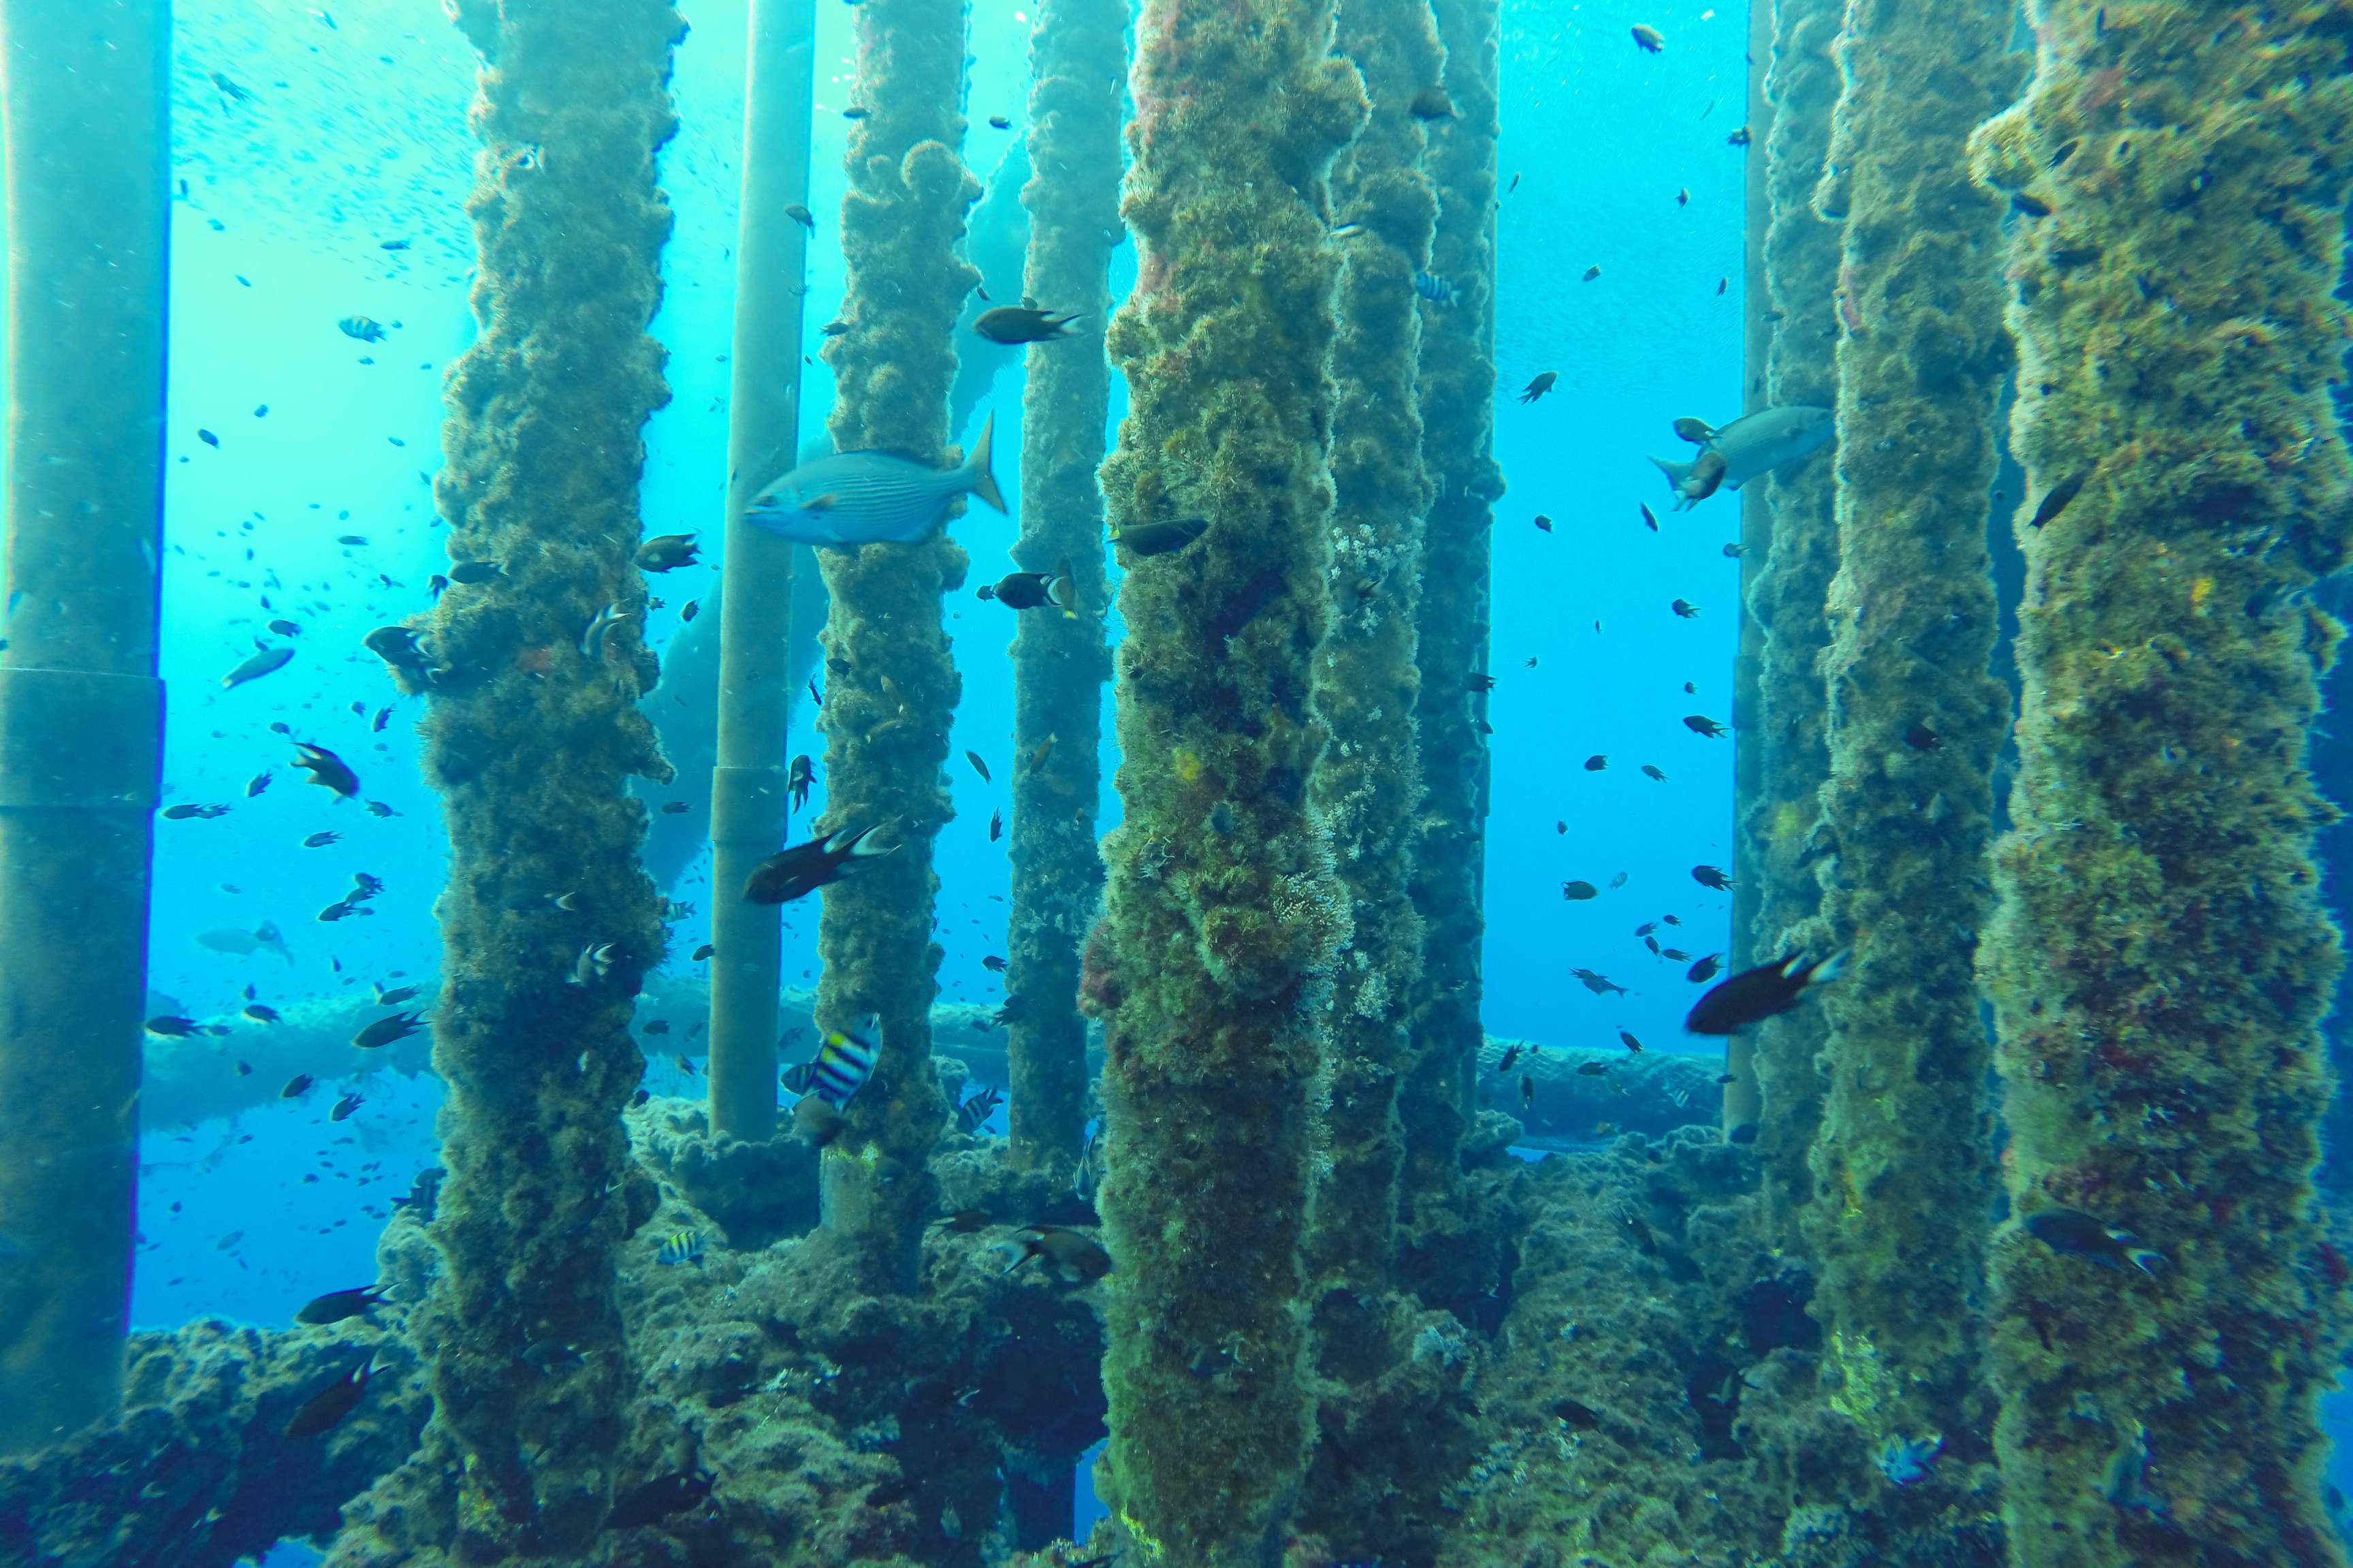 Underwater pipelines in the sea, overgrown and swarming with fish.